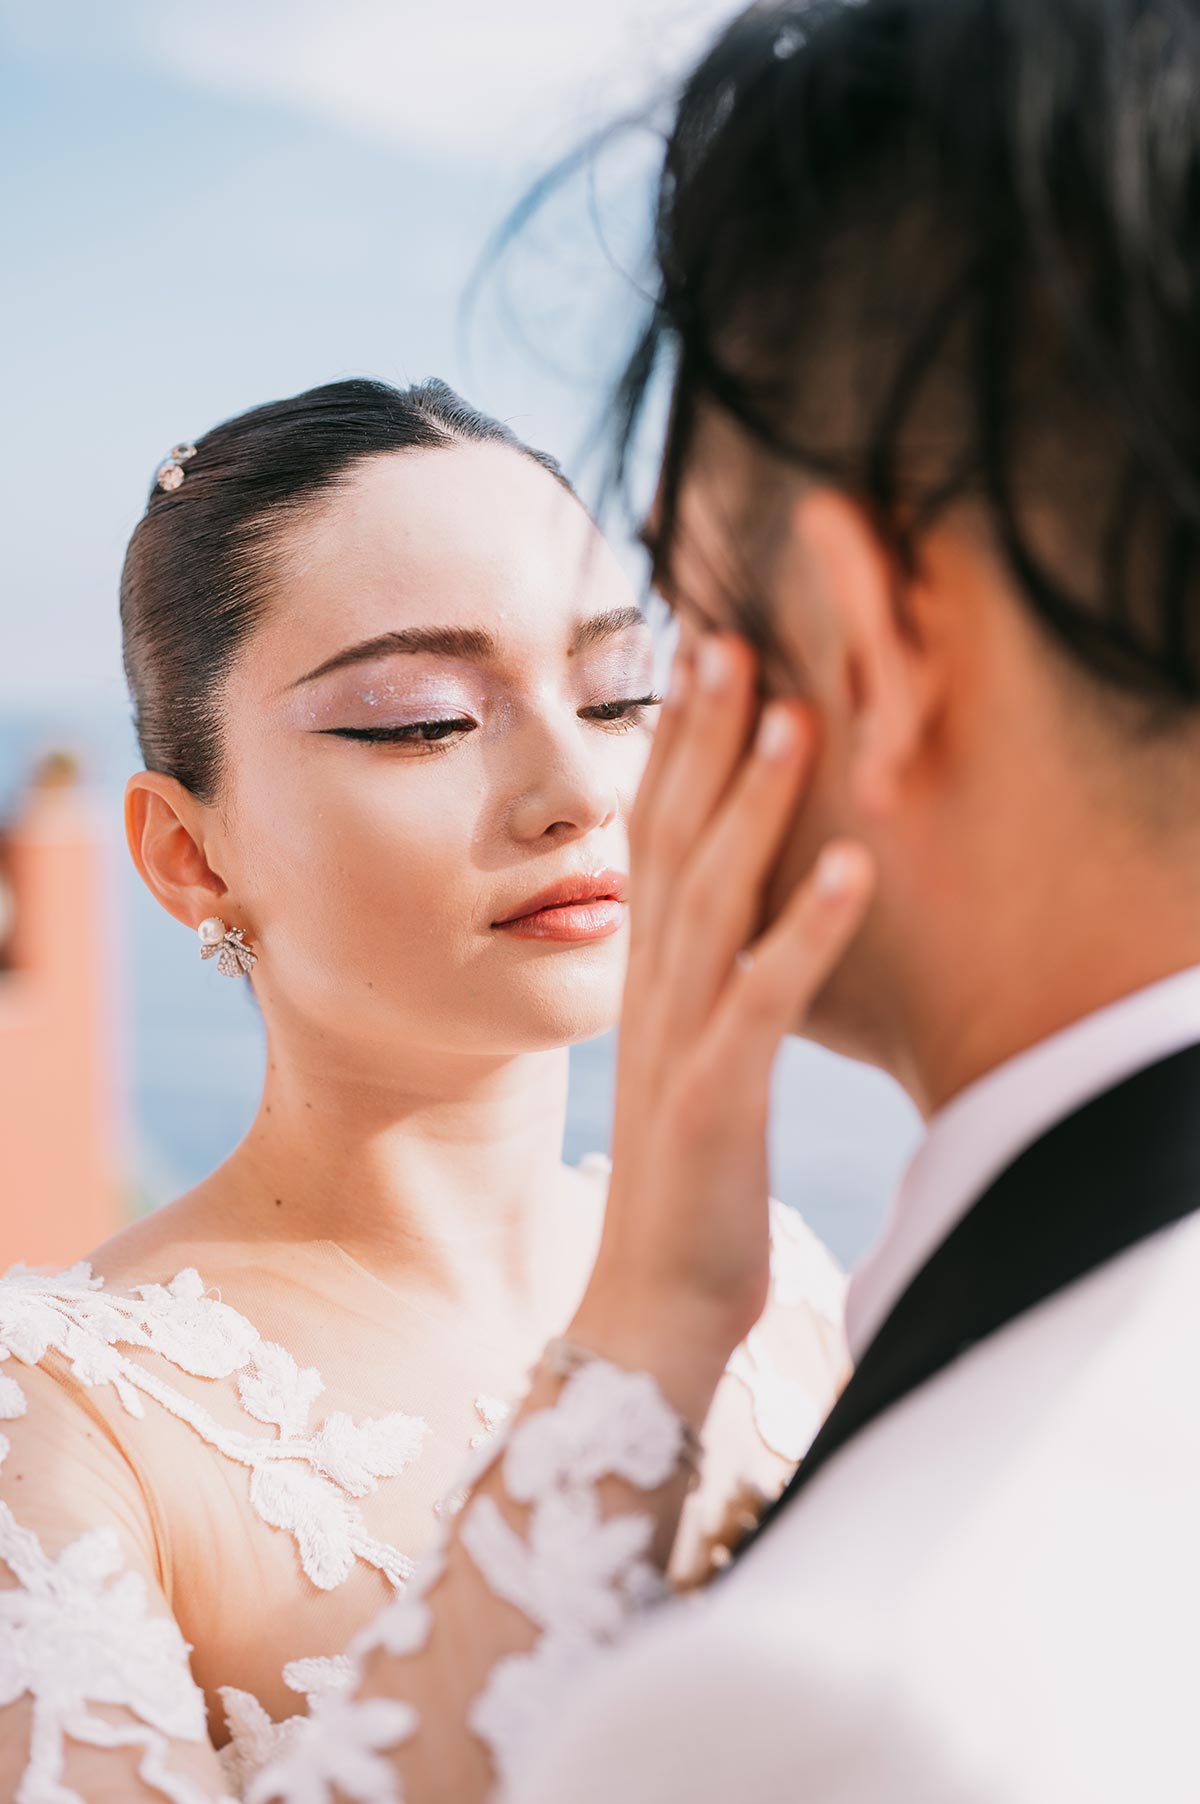 Personal photographer in Sorrento | Emiliano Russo | Villa dei Fisici wedding 5 3 | One of the treasures of the Amalfi Coast is Sorrento. Hiring a Personal Photographer Sorrento, you can capture all the amazing moments of your trip